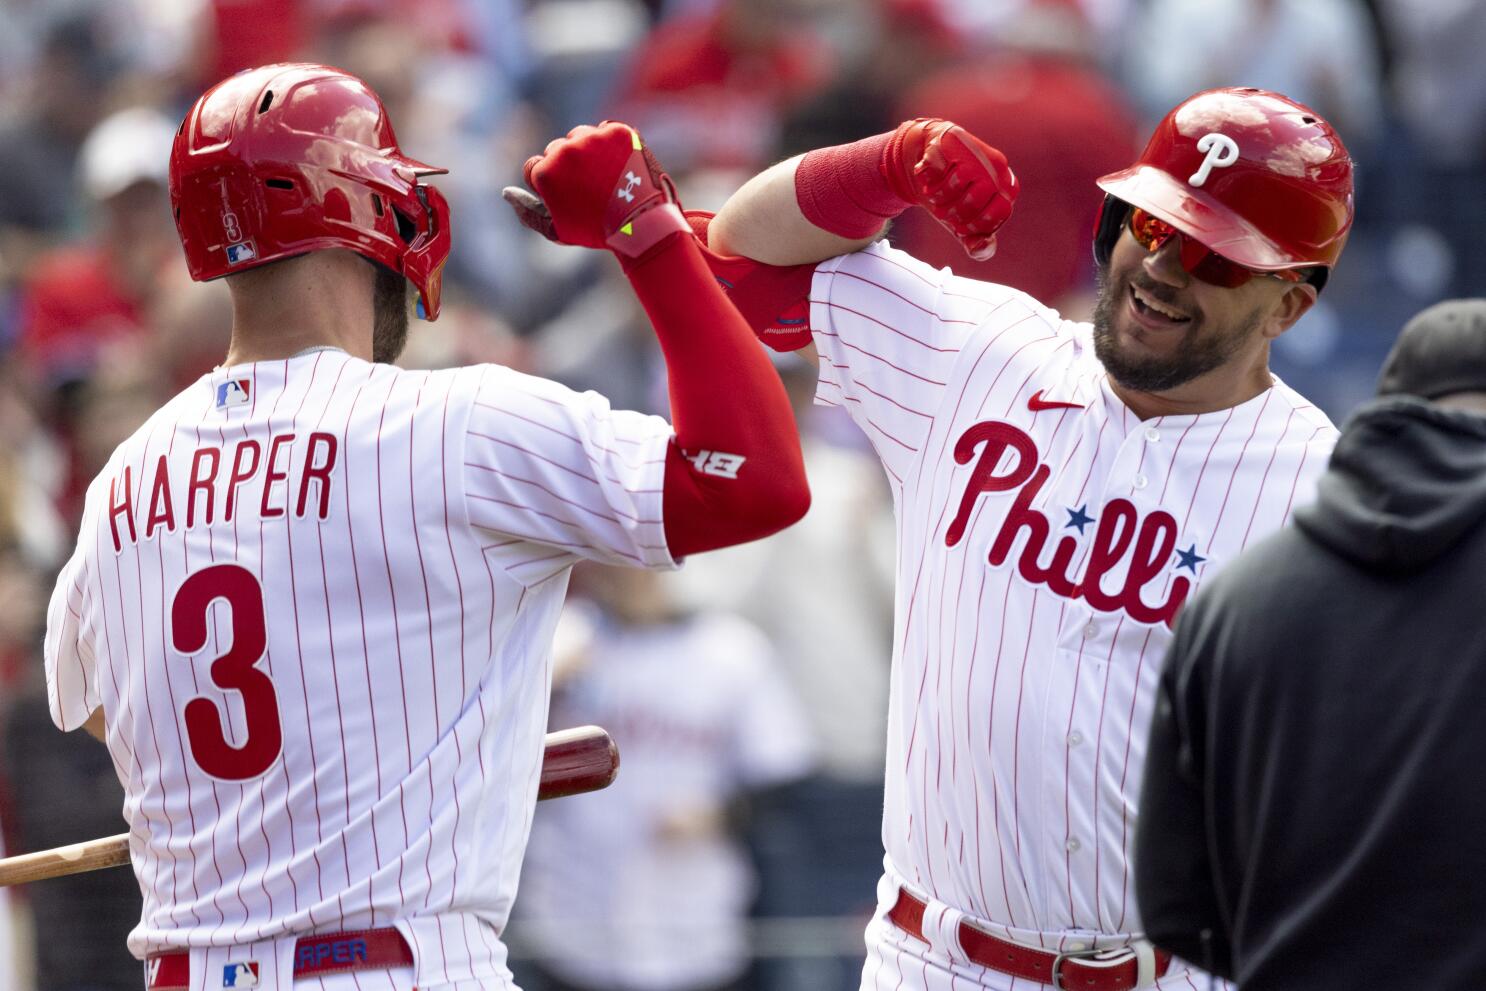 Schwarber goes deep for Phillies in 9-5 win over Athletics - The